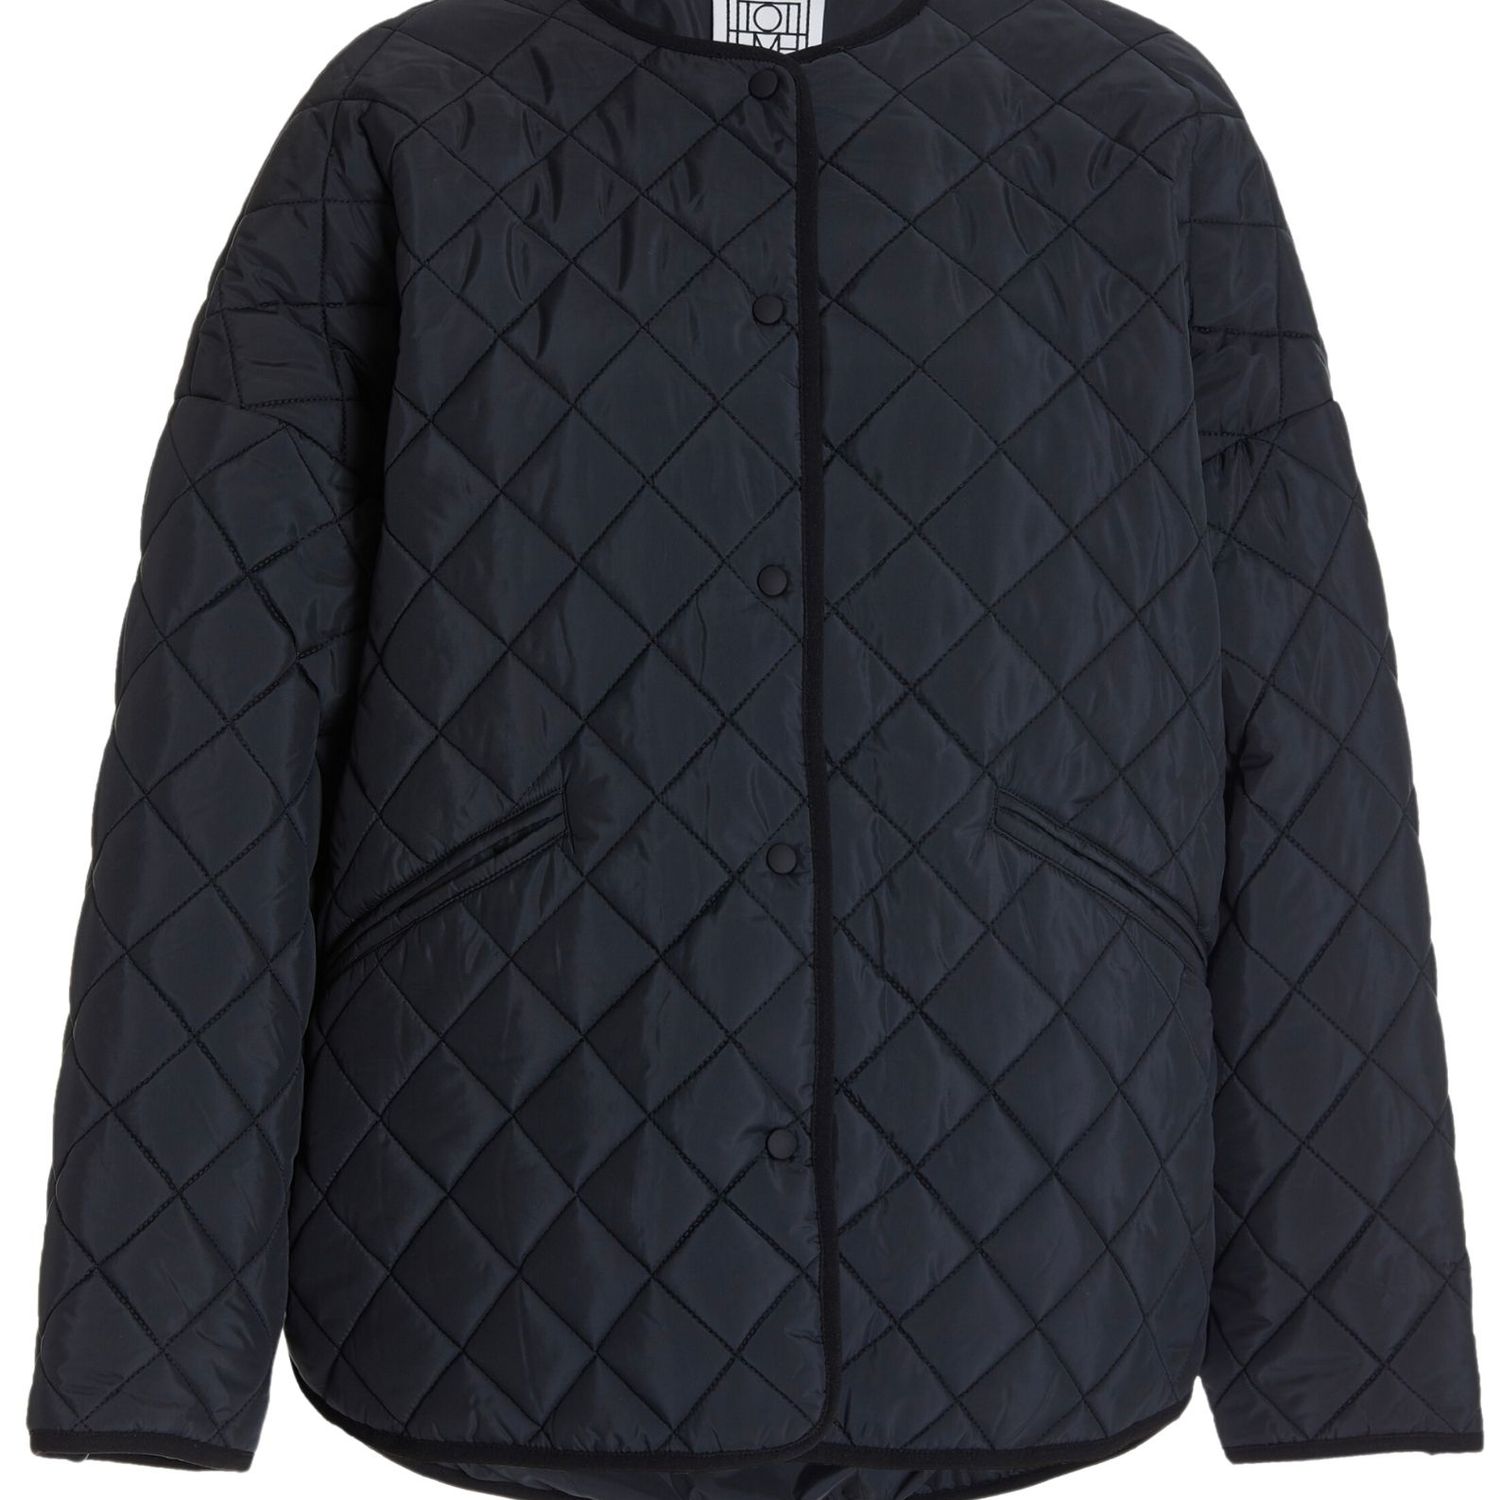 Oversized quilted jacket in black - Toteme